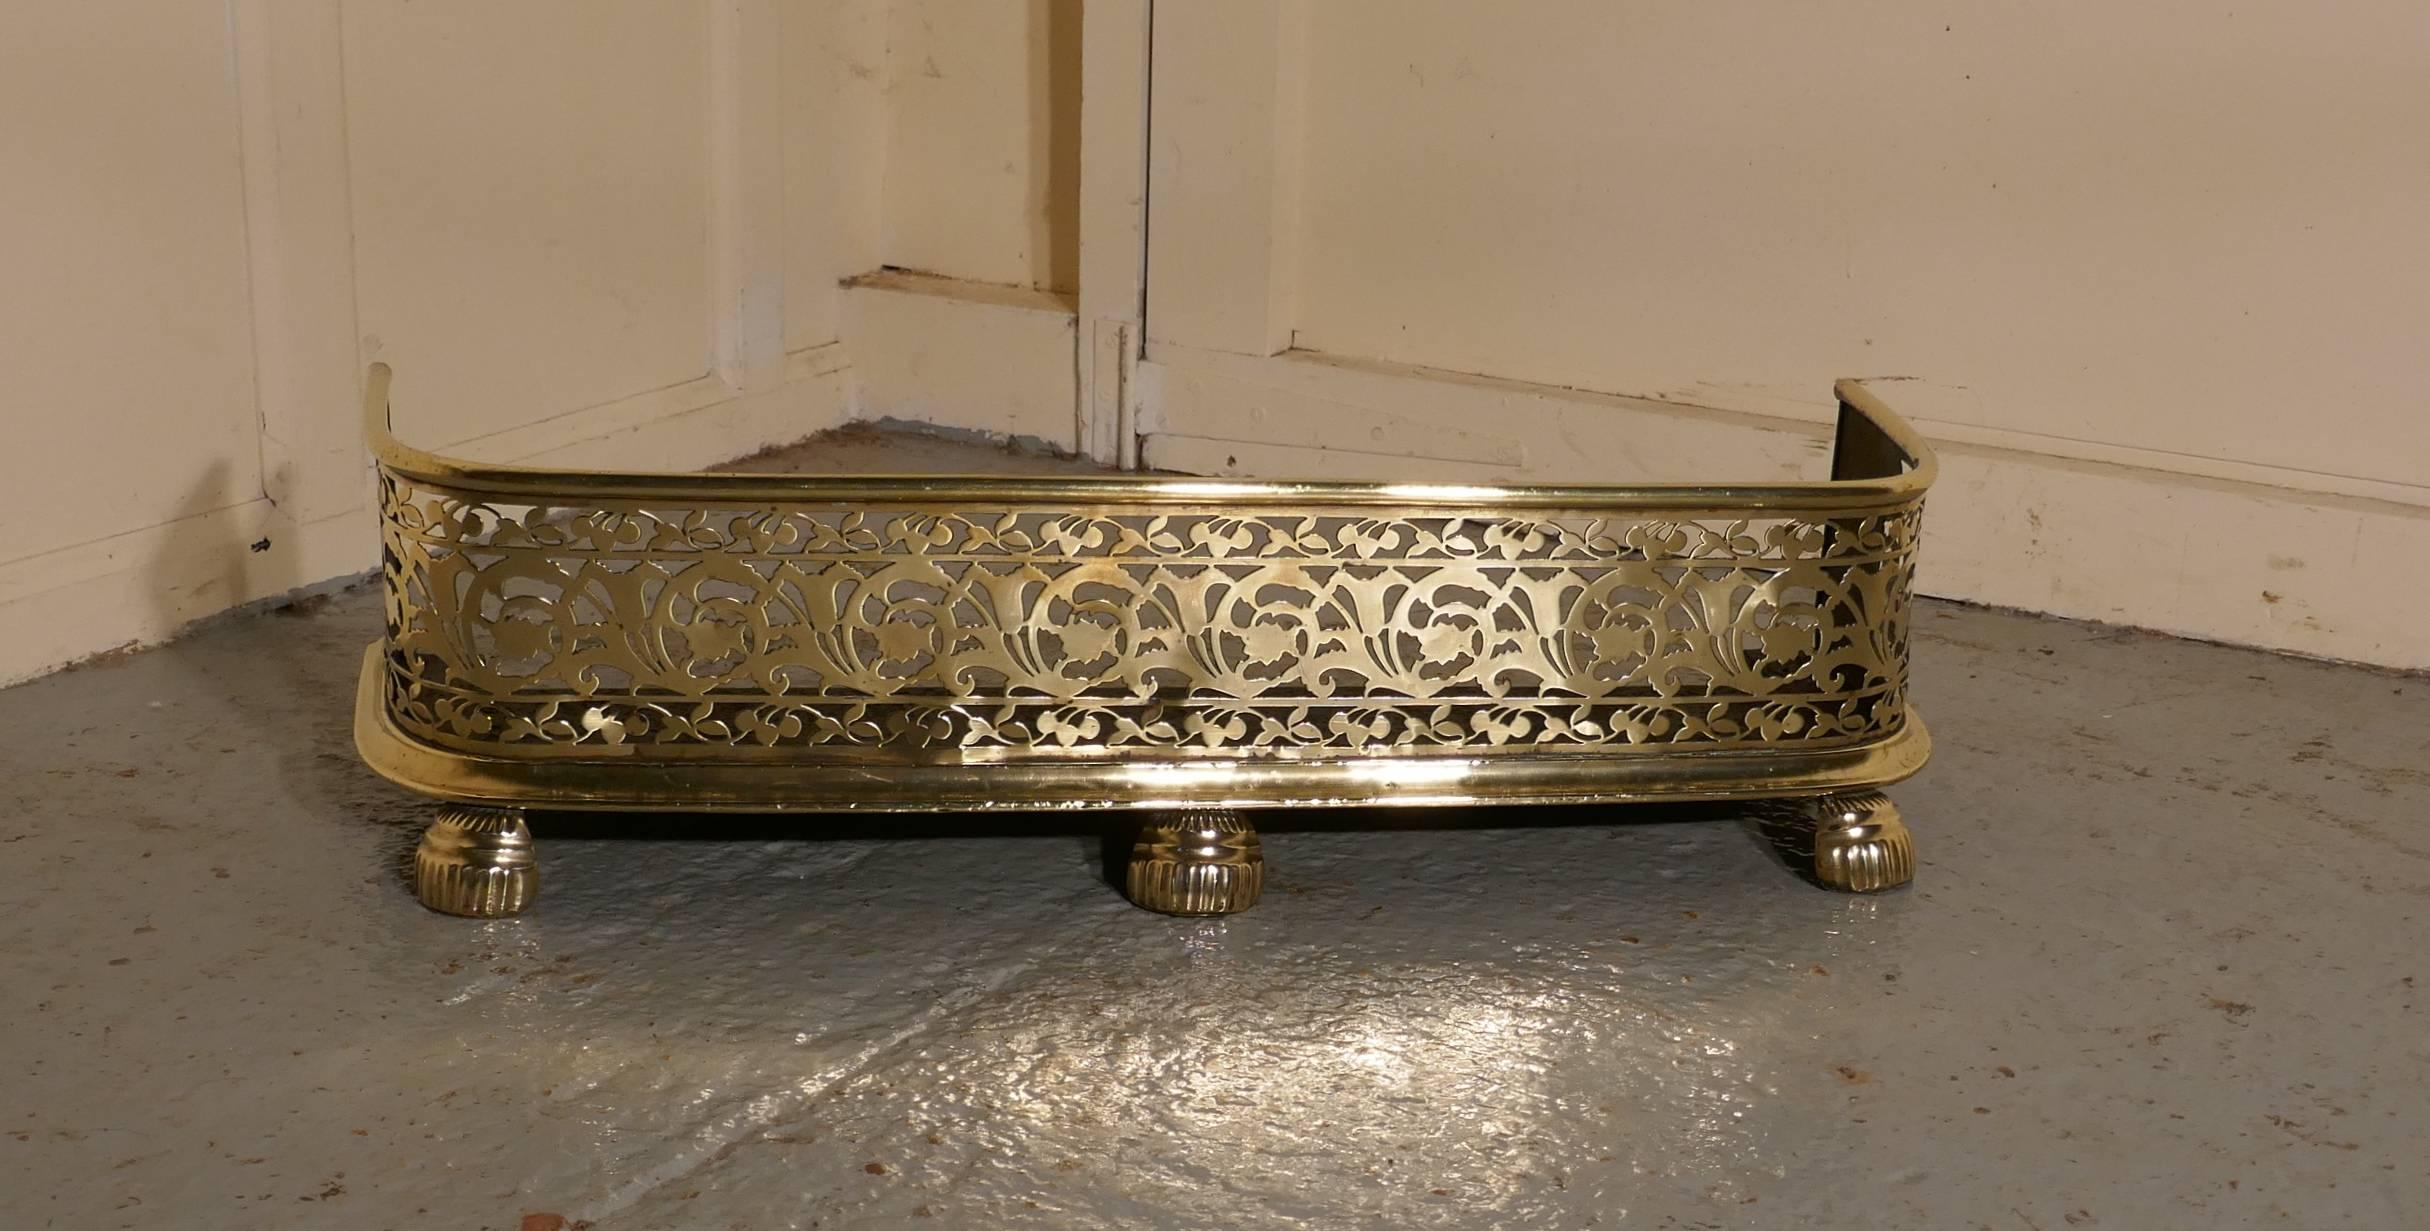 Fine quality Victorian Arts & Crafts pierced brass fender

This is a Victorian pierced brass fender it has, an elaborate pierced decoration, an iron base and stands on large hoof feet
the fender is in very good condition it is 8” high, and 31”